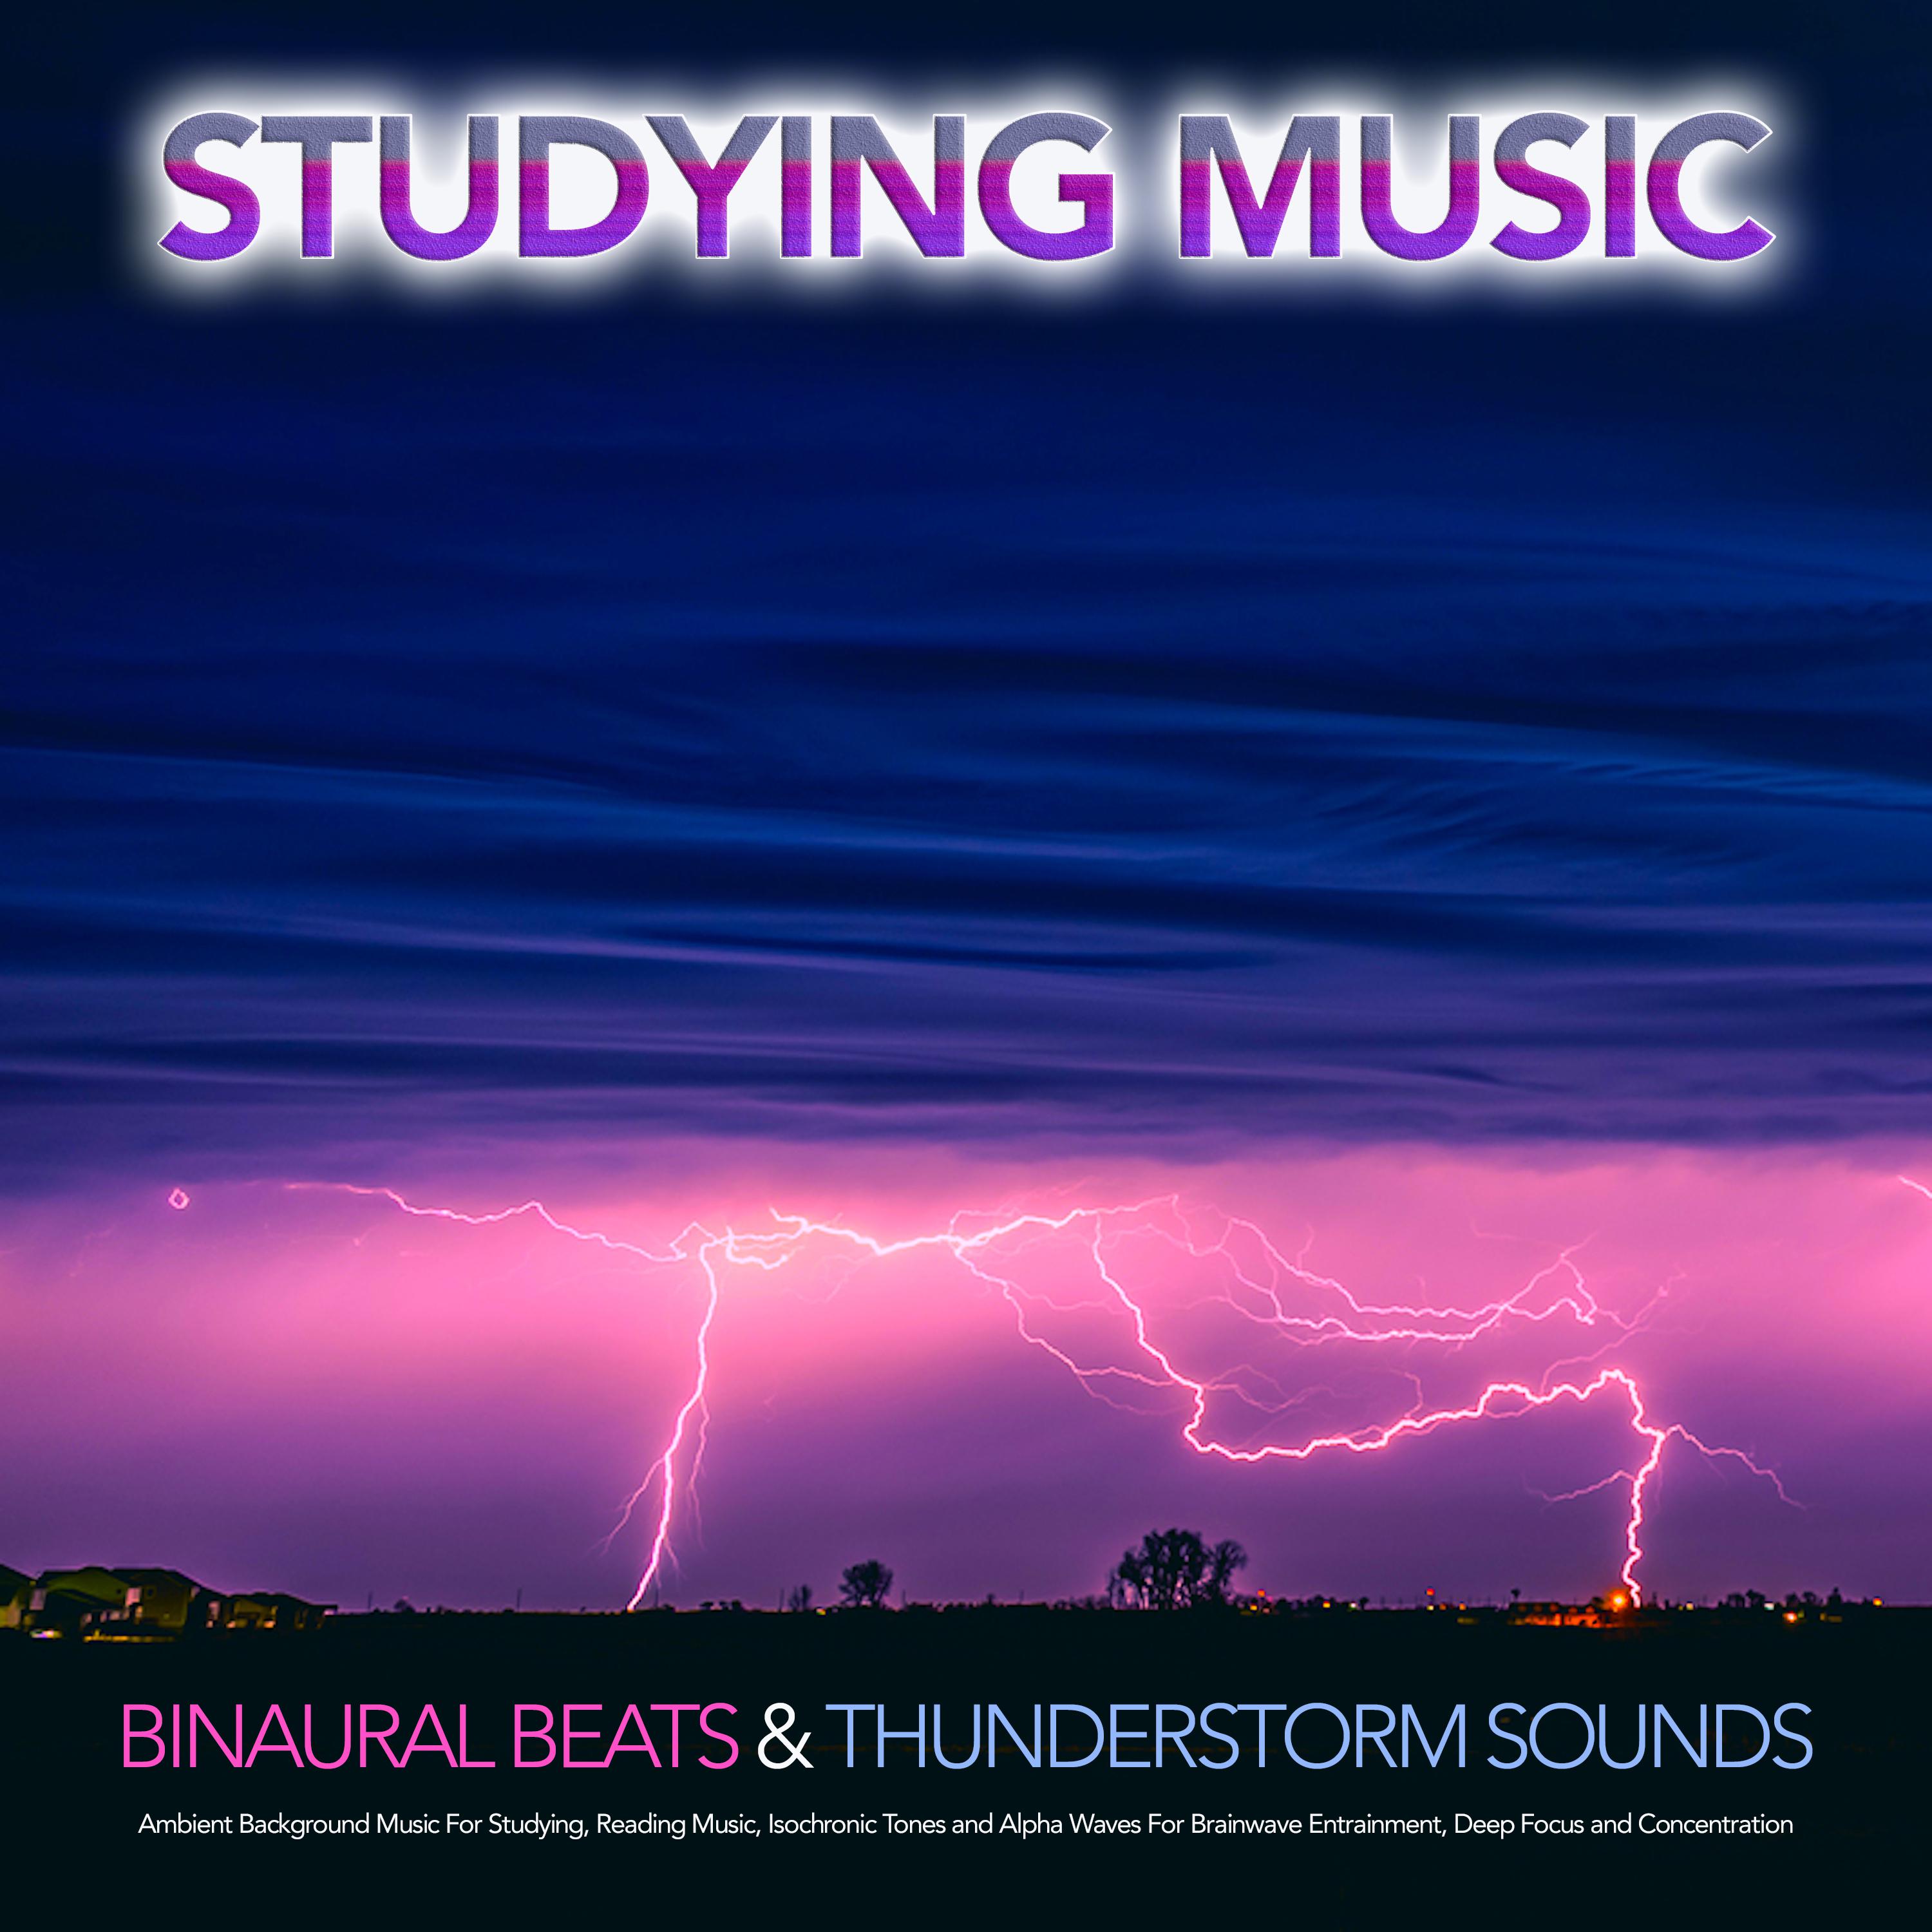 Thunderstorm Sounds For Concentration and Focus